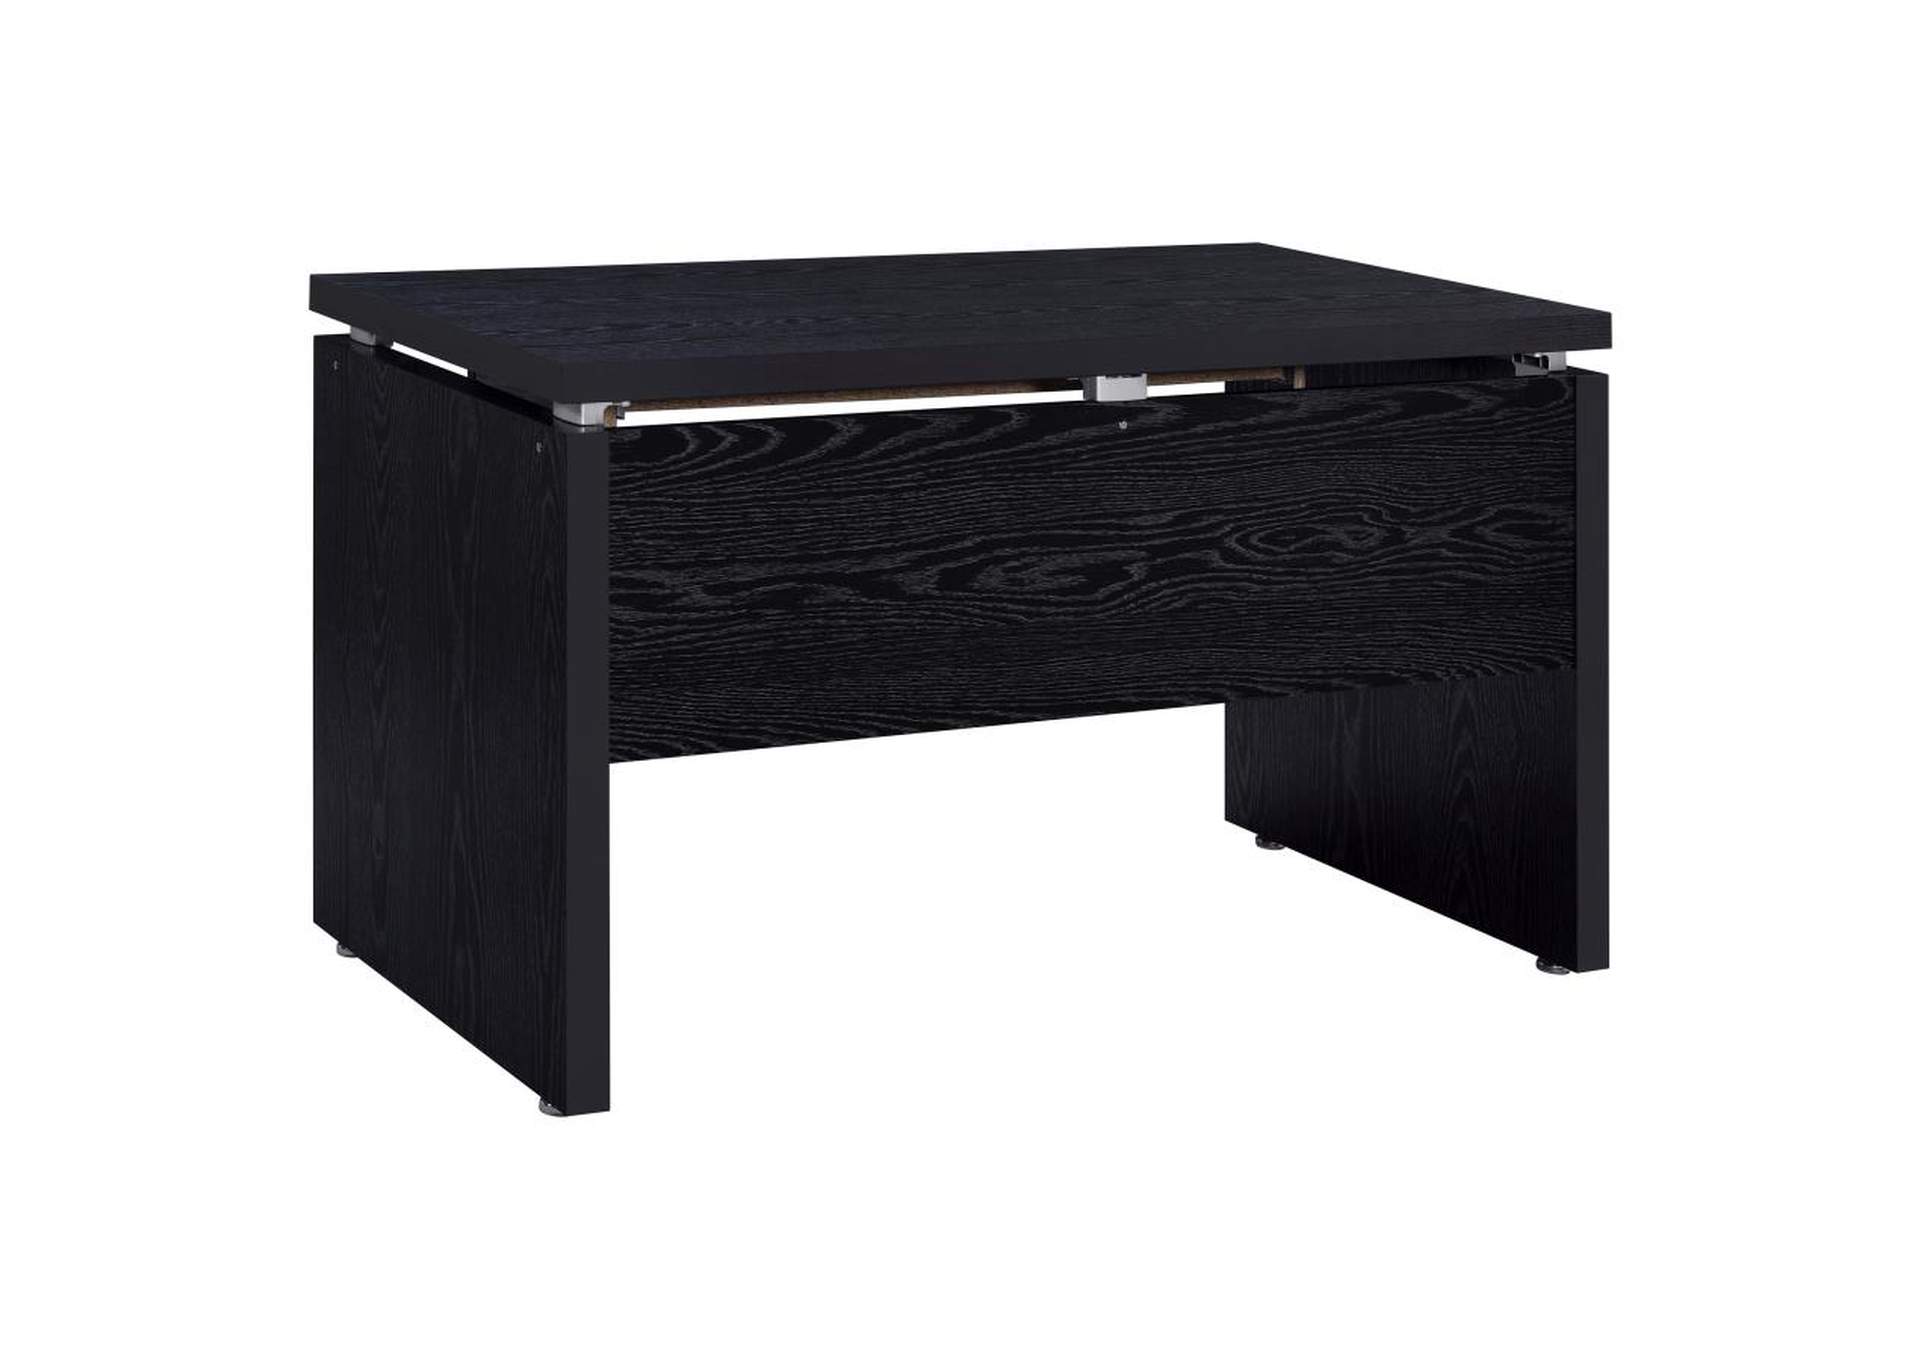 Russell Computer Desk with Keyboard Tray Black Oak,Coaster Furniture